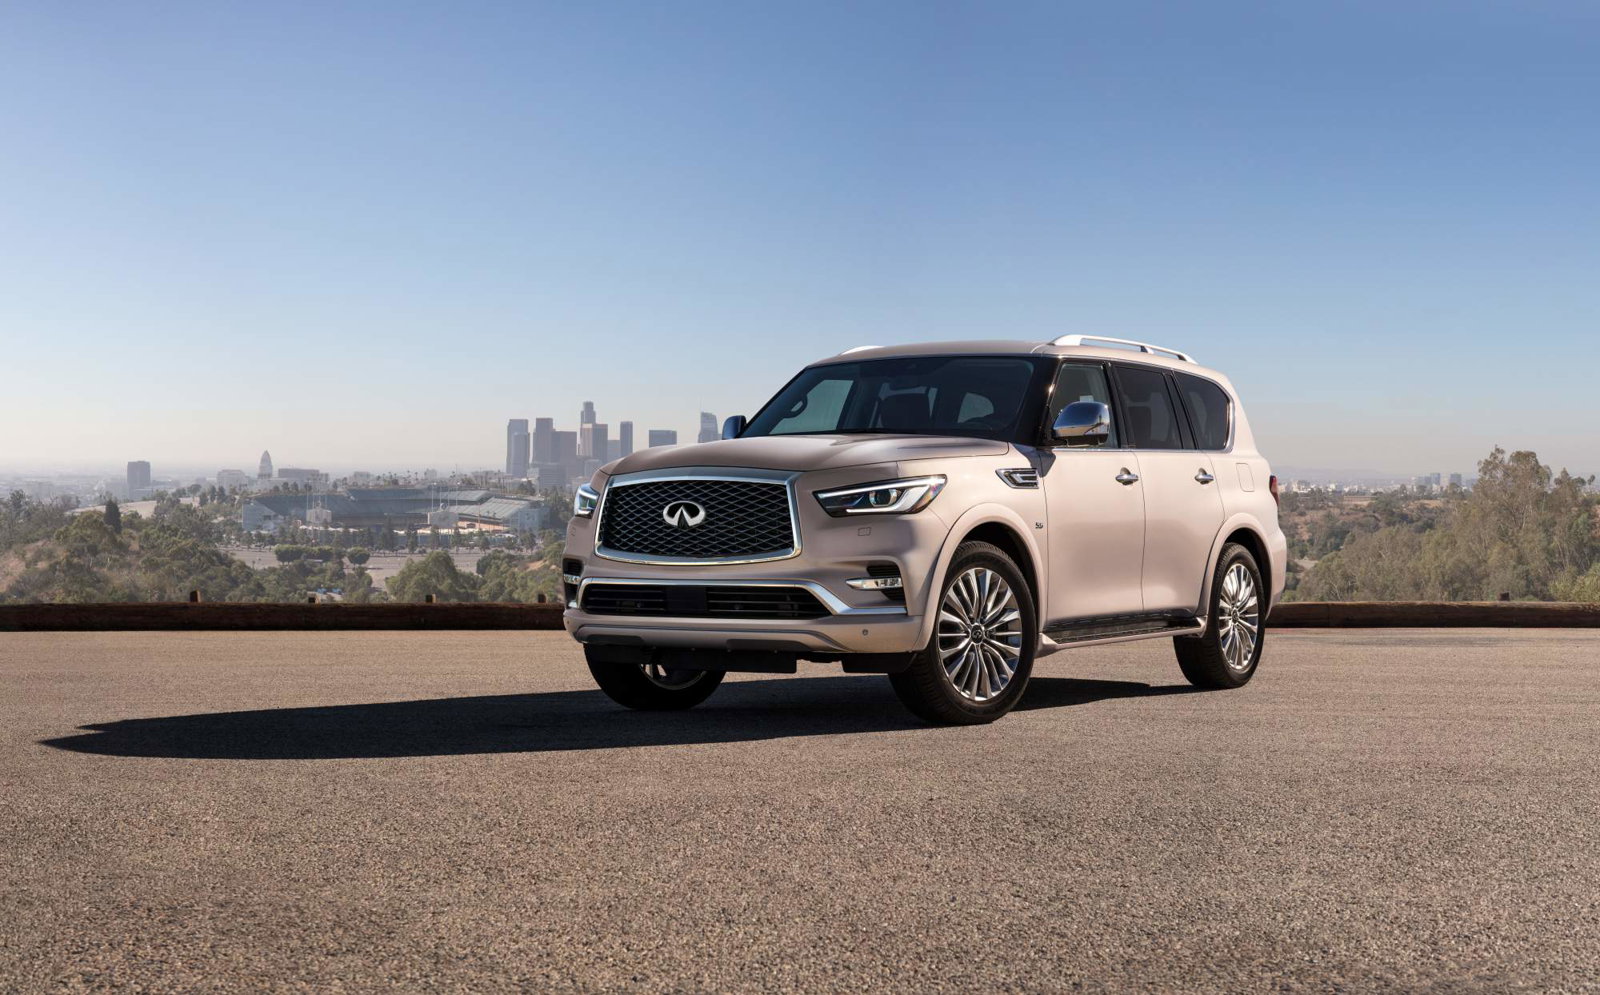 Facelifted 2018 Infiniti QX80 debuts improved styling, not much else ...